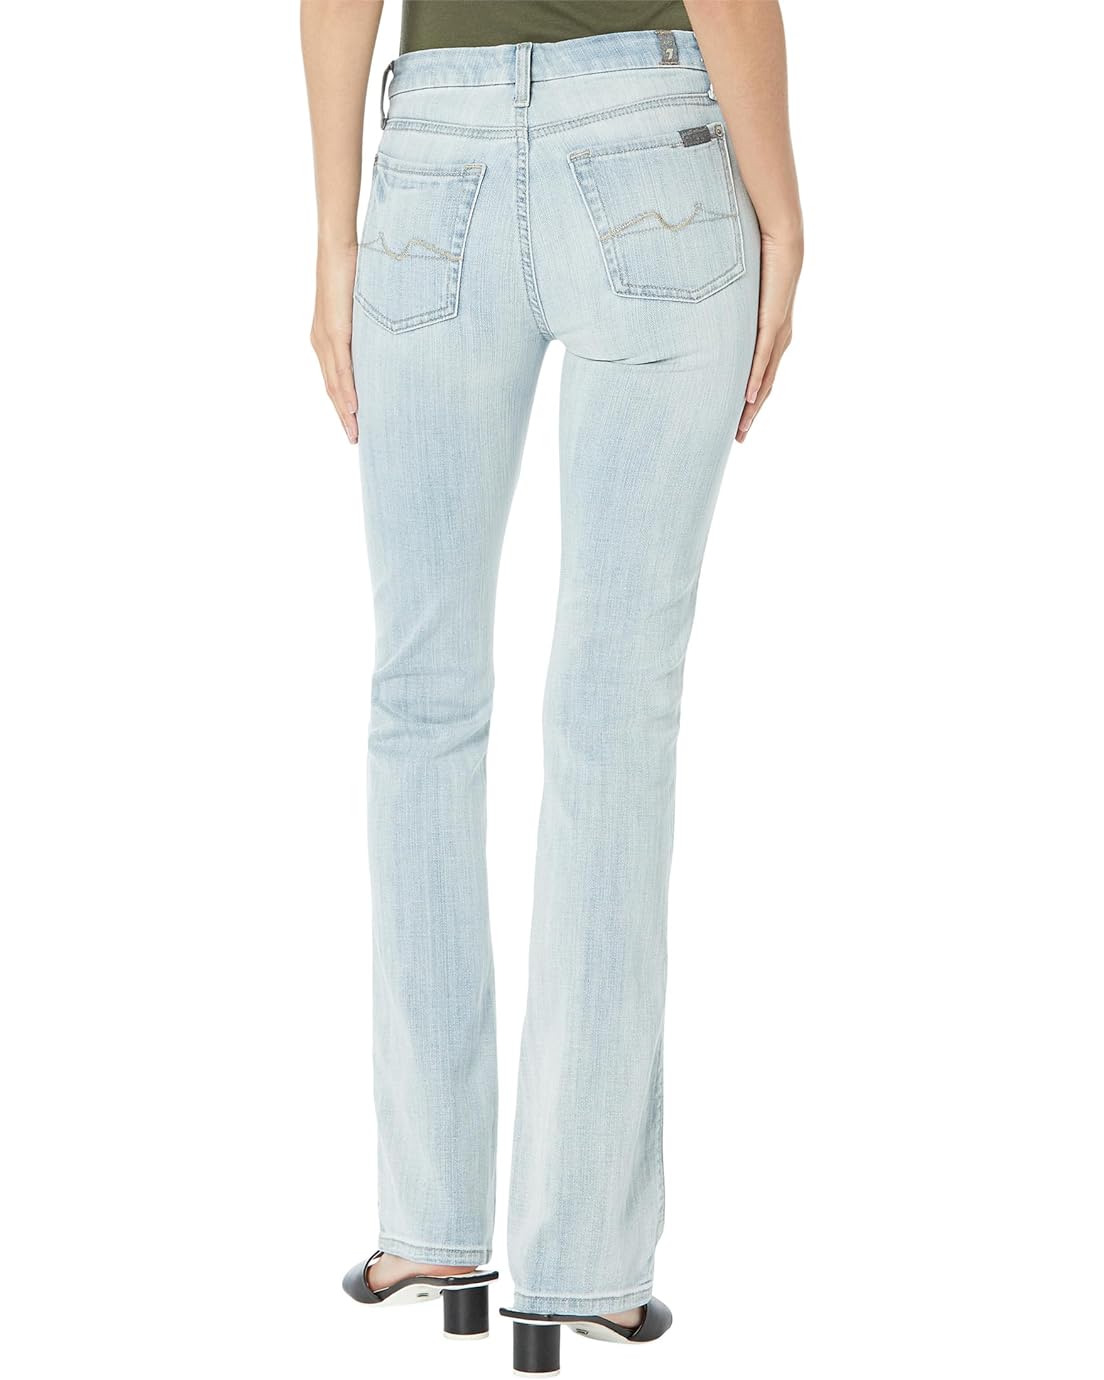  7 For All Mankind Kimmie Bootcut in Coco Prive Clean